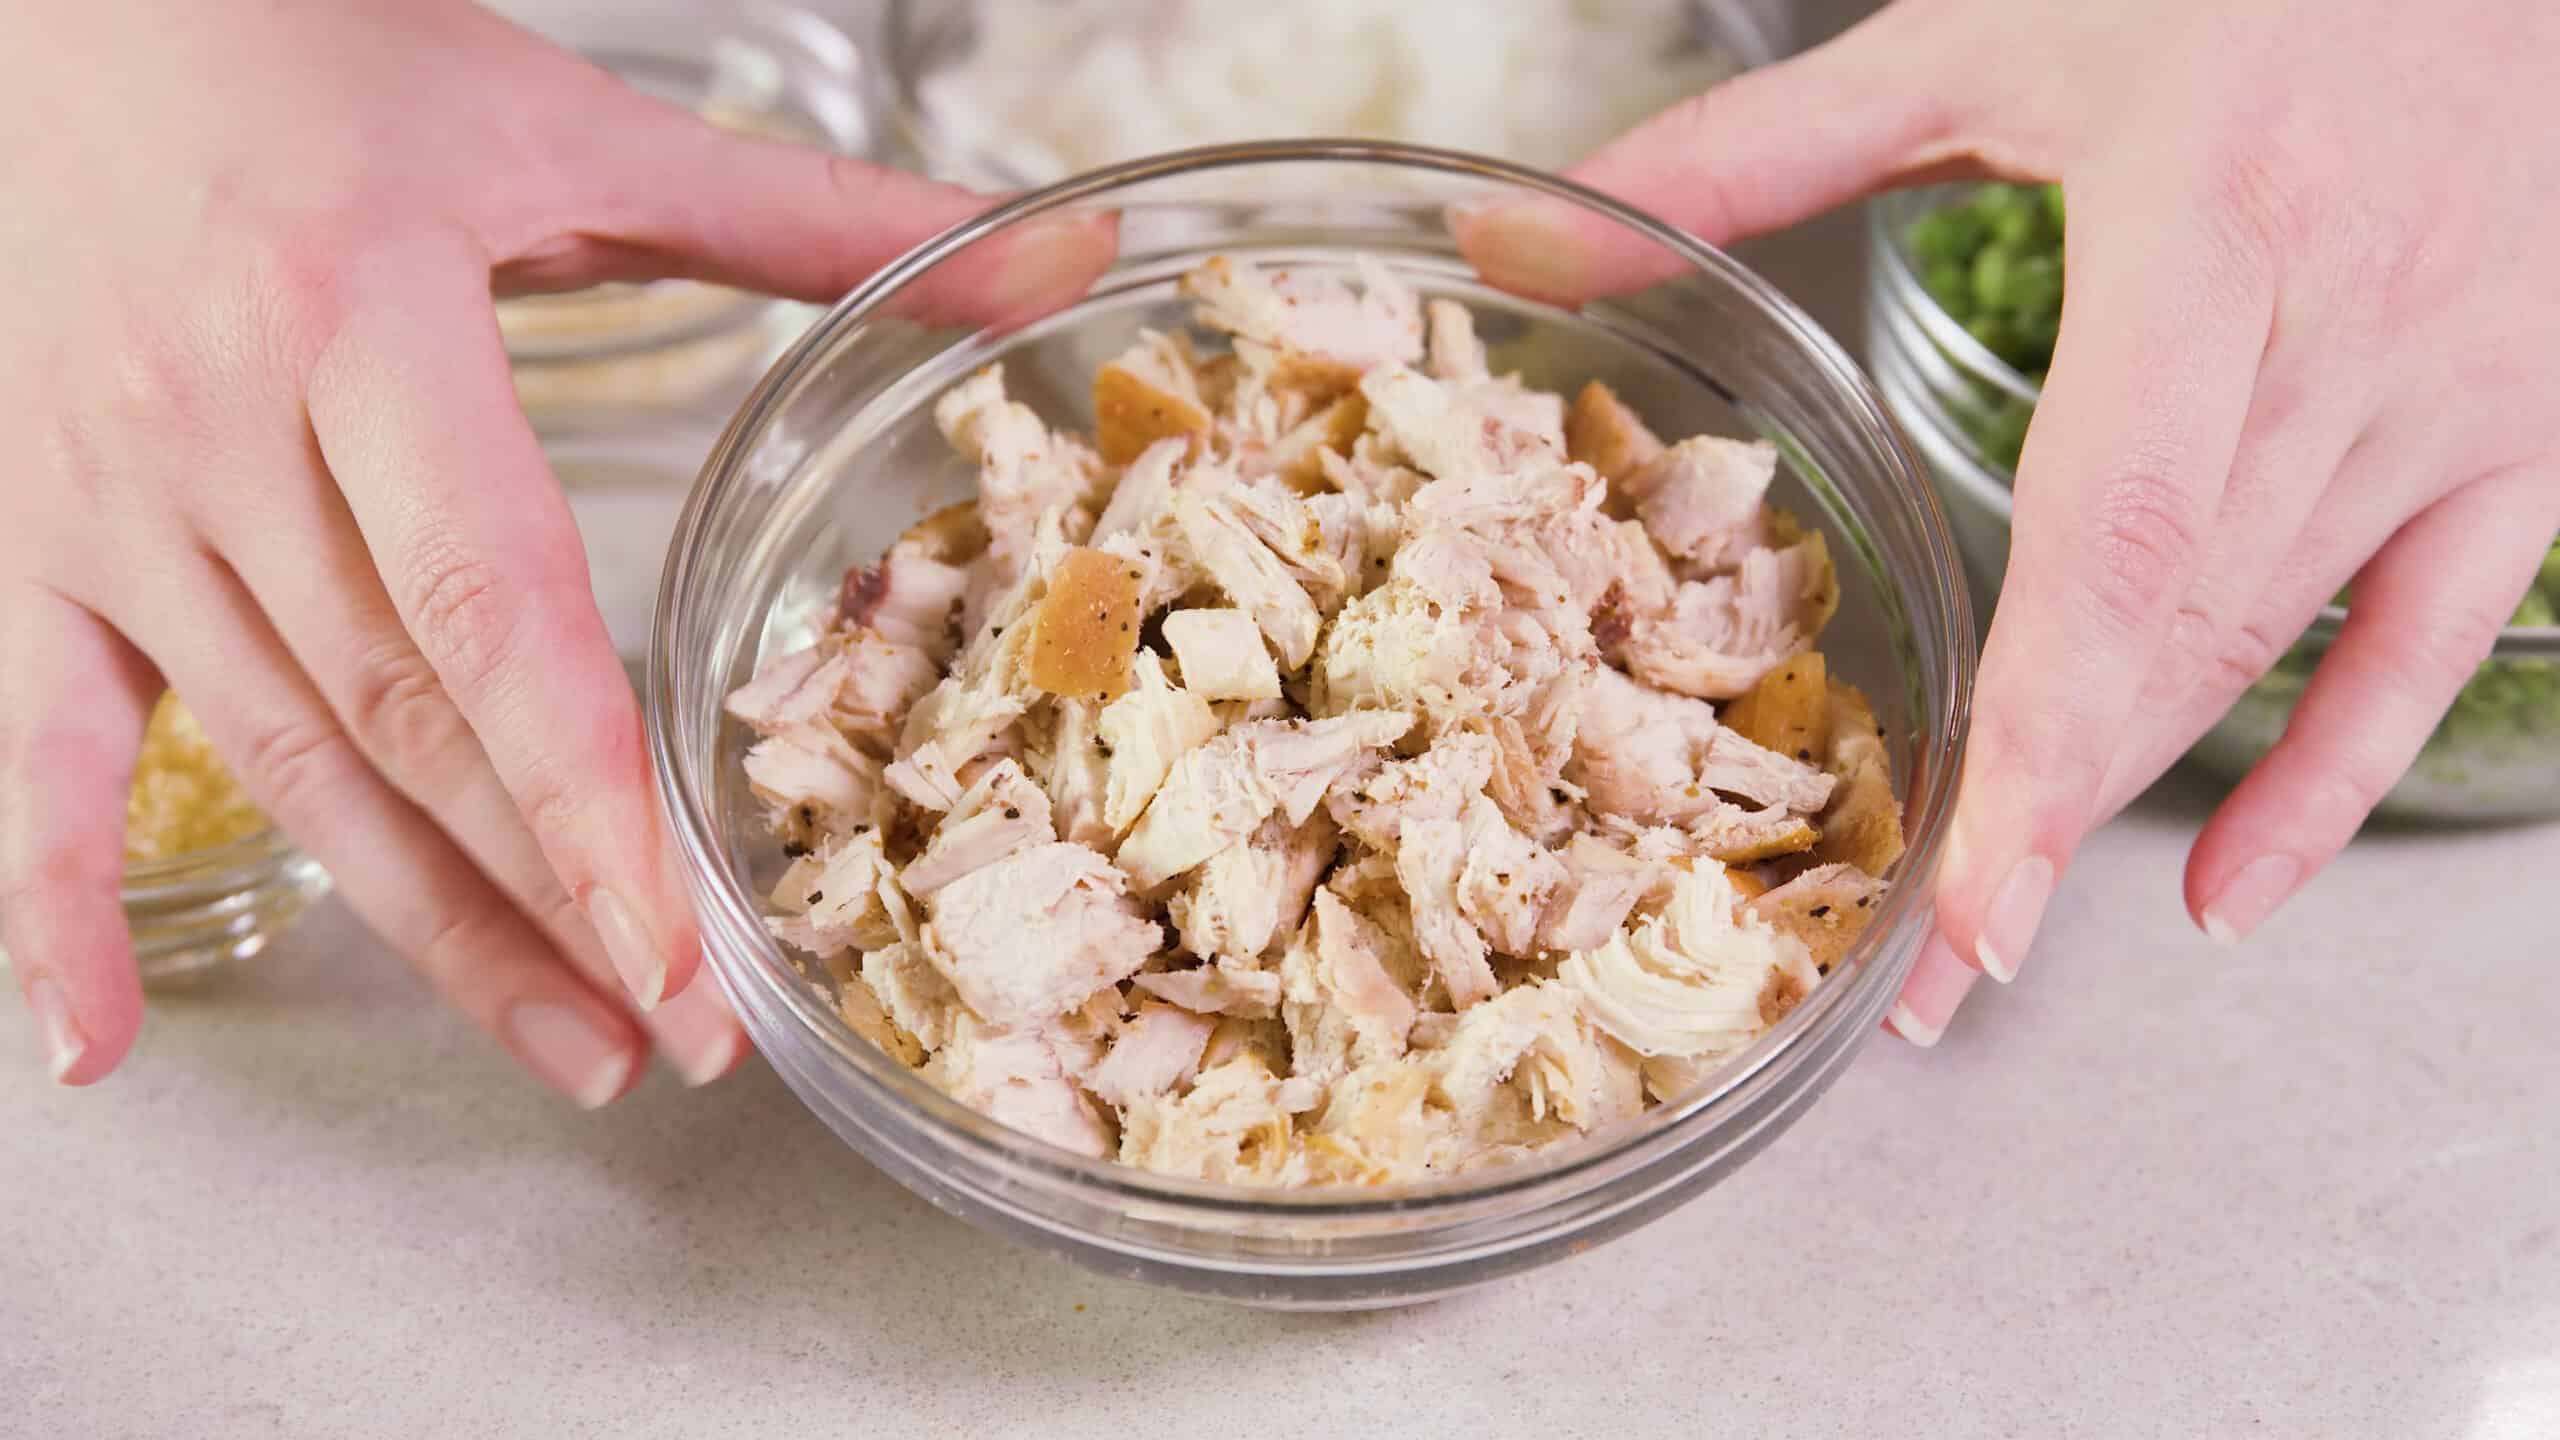 Angled view of clear glass mixing bowl filled with chopped seasoned chicken.